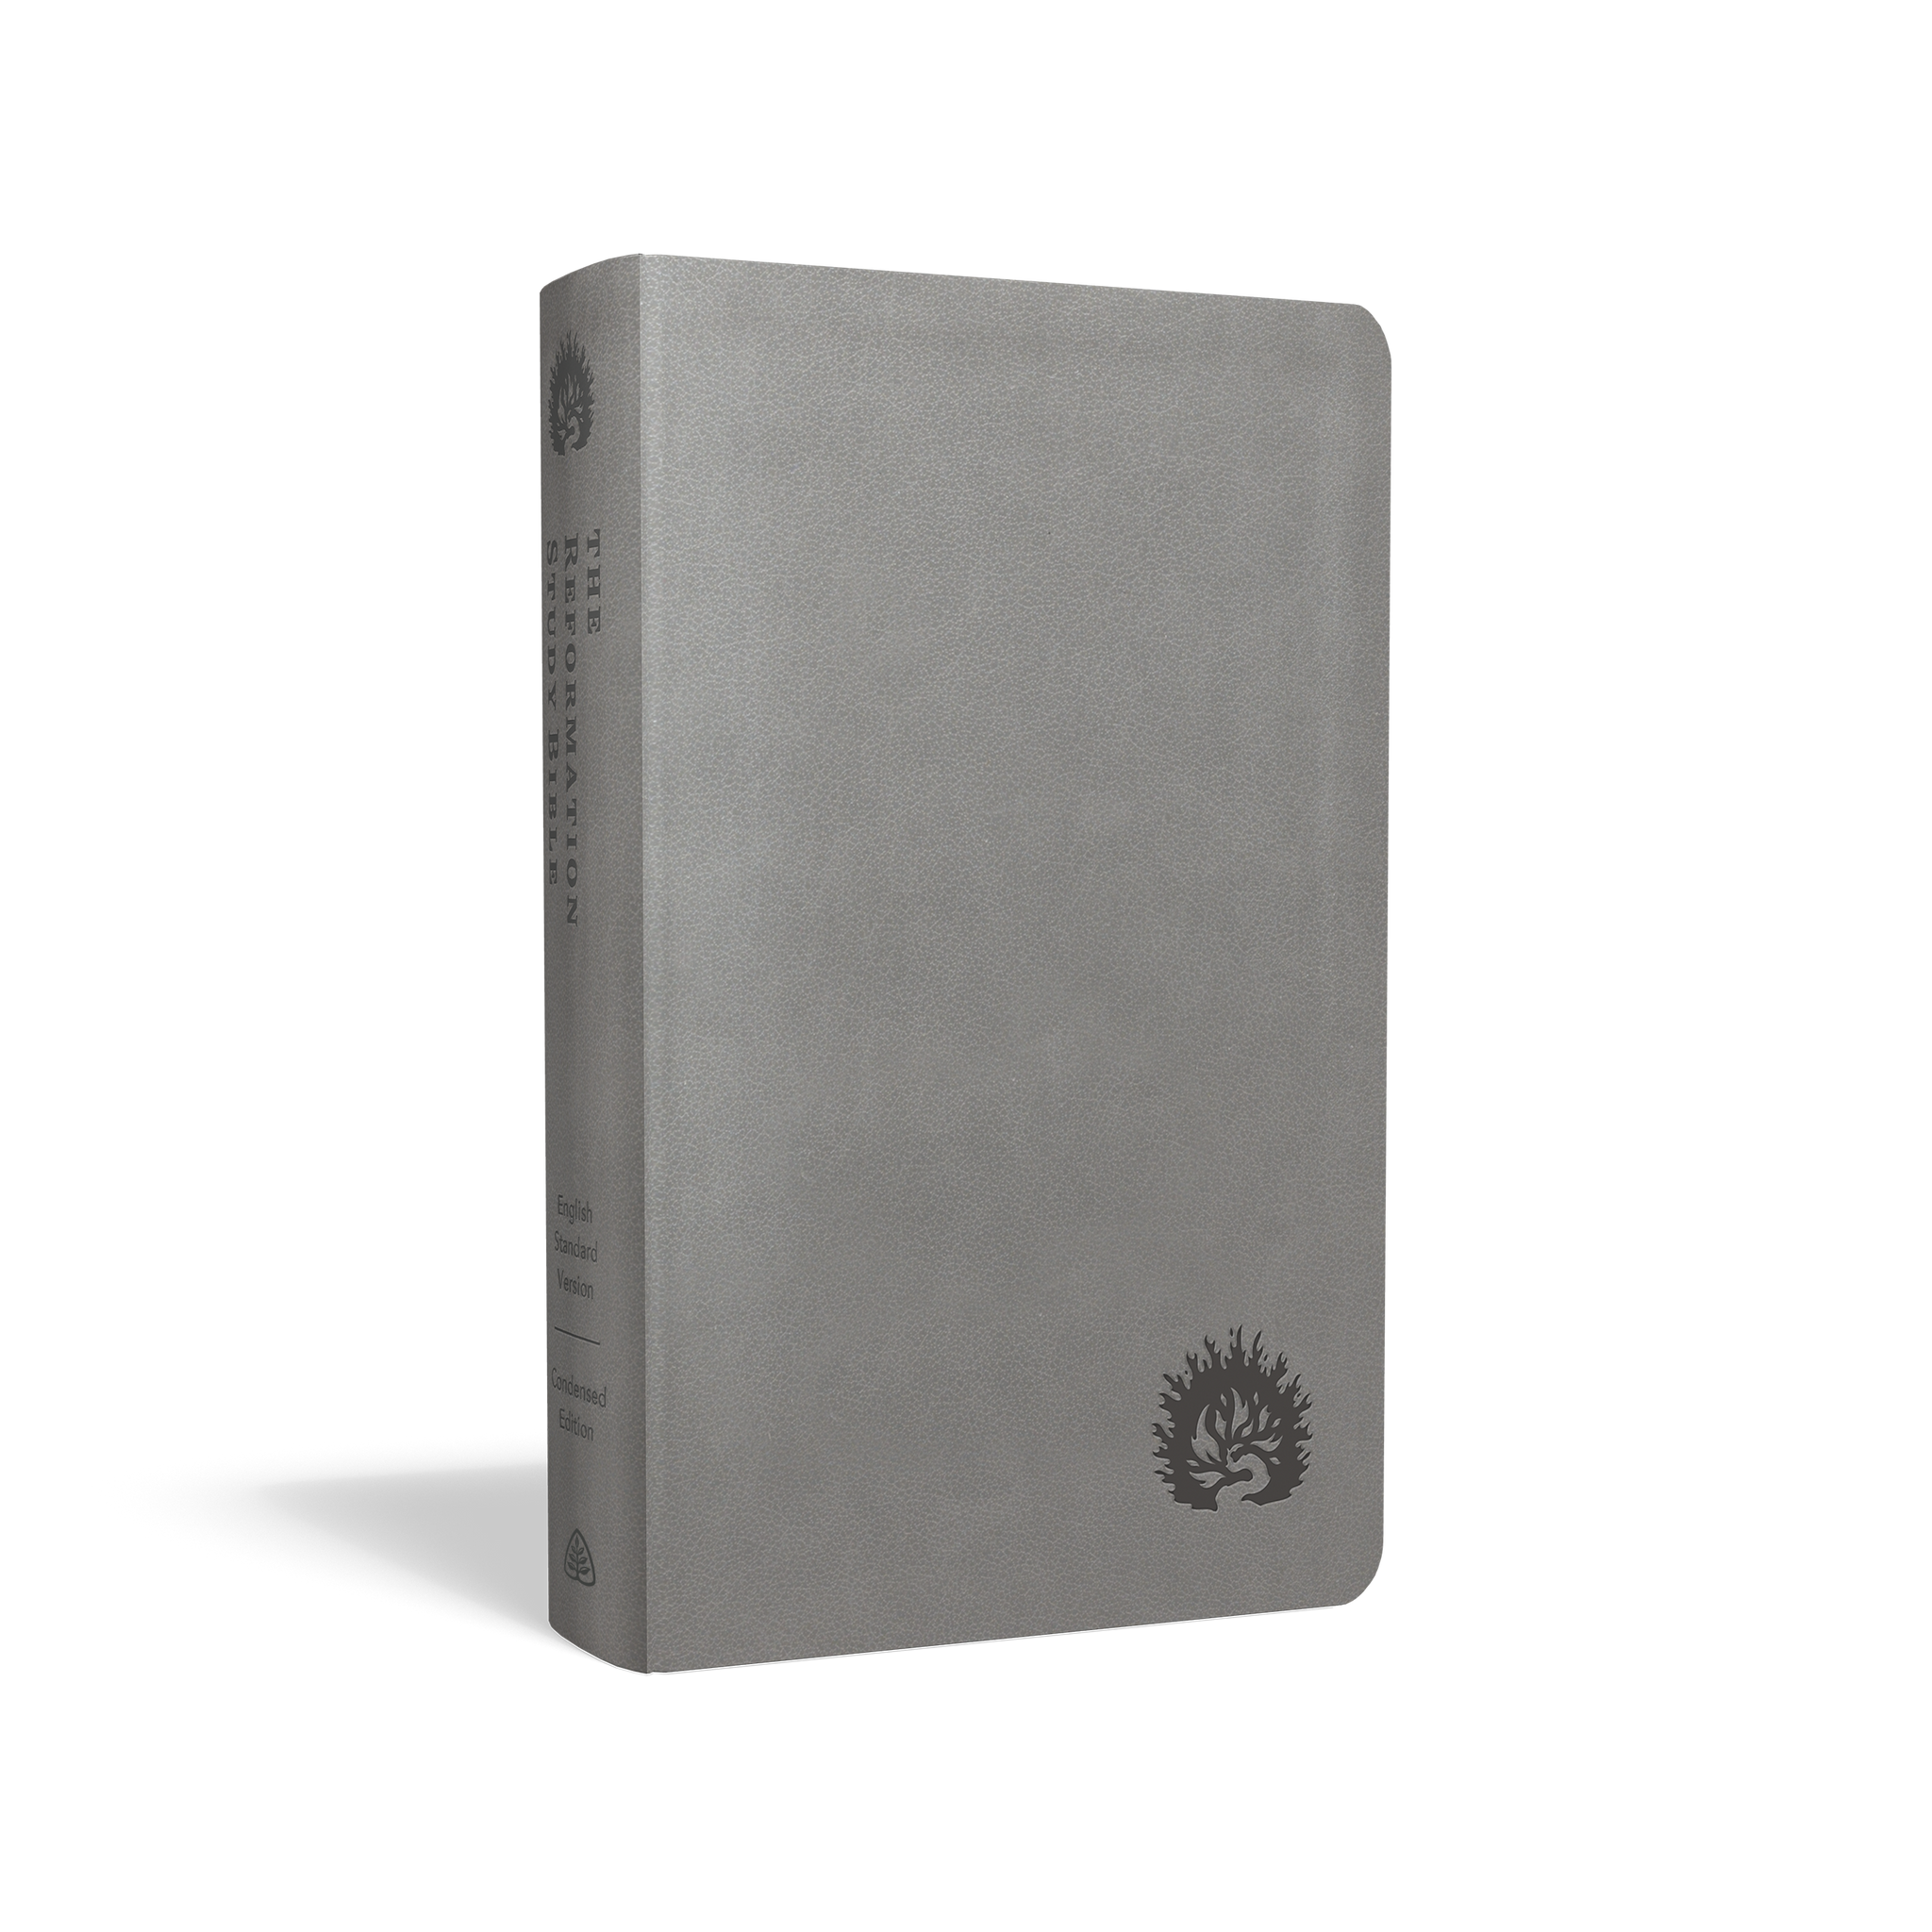 ESV Reformation Study Bible, Condensed Edition (Leather-like, Light Gray)